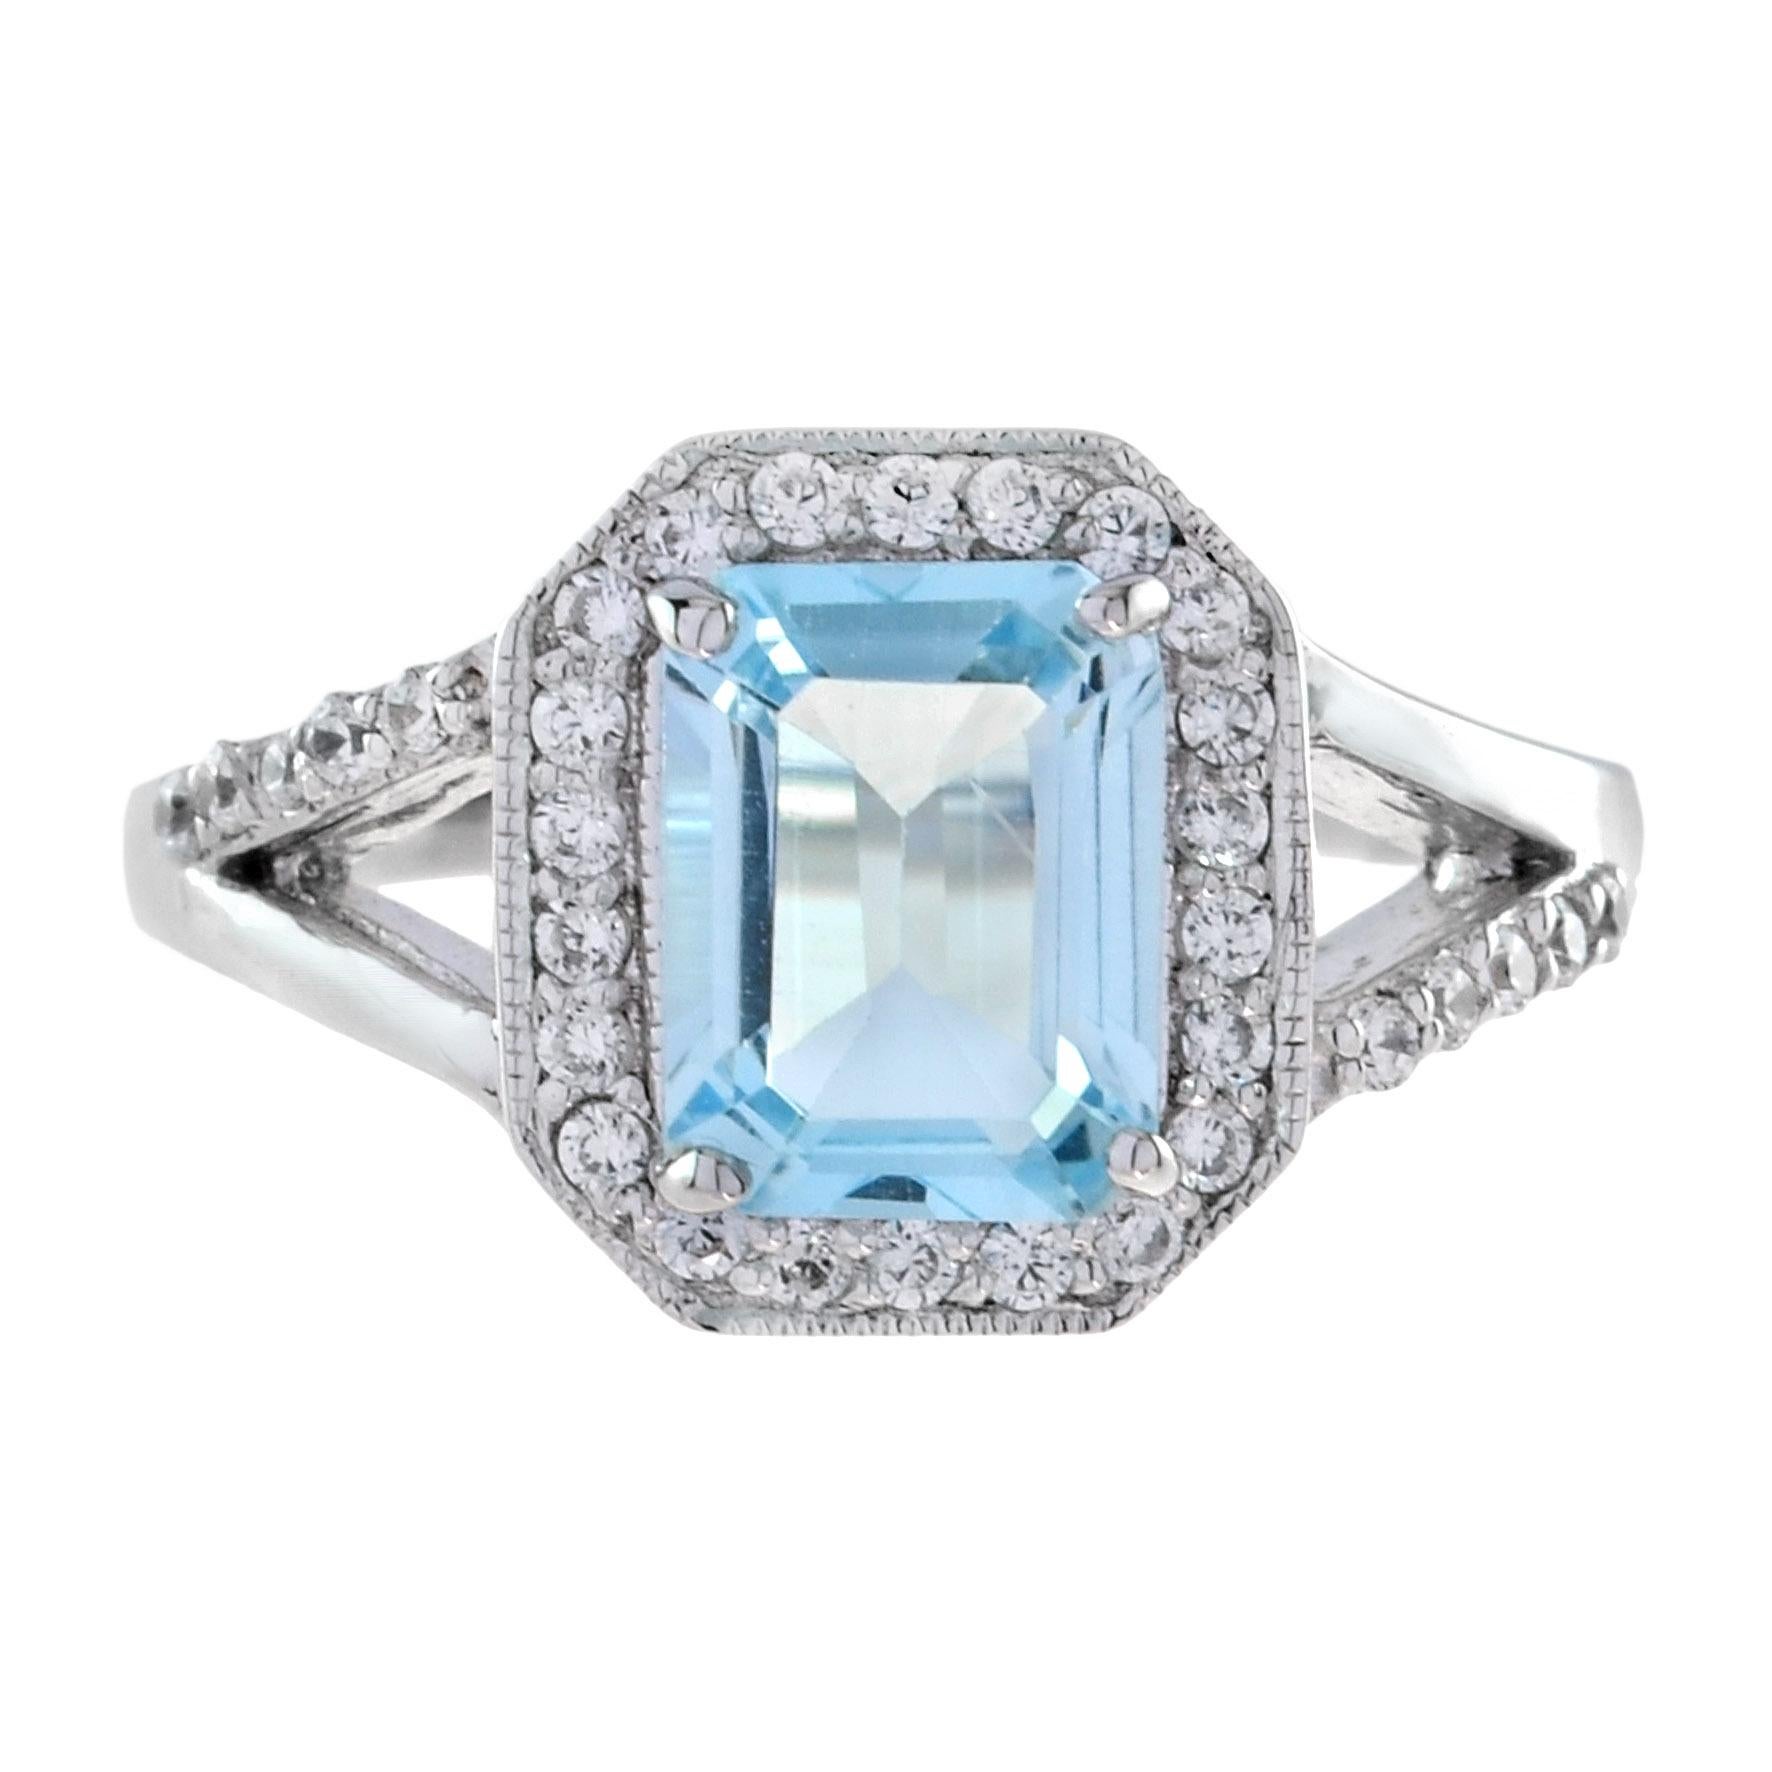 For Sale:  Emerald Cut Aquamarine and Diamond Split Shank Halo Ring in 18K White Gold